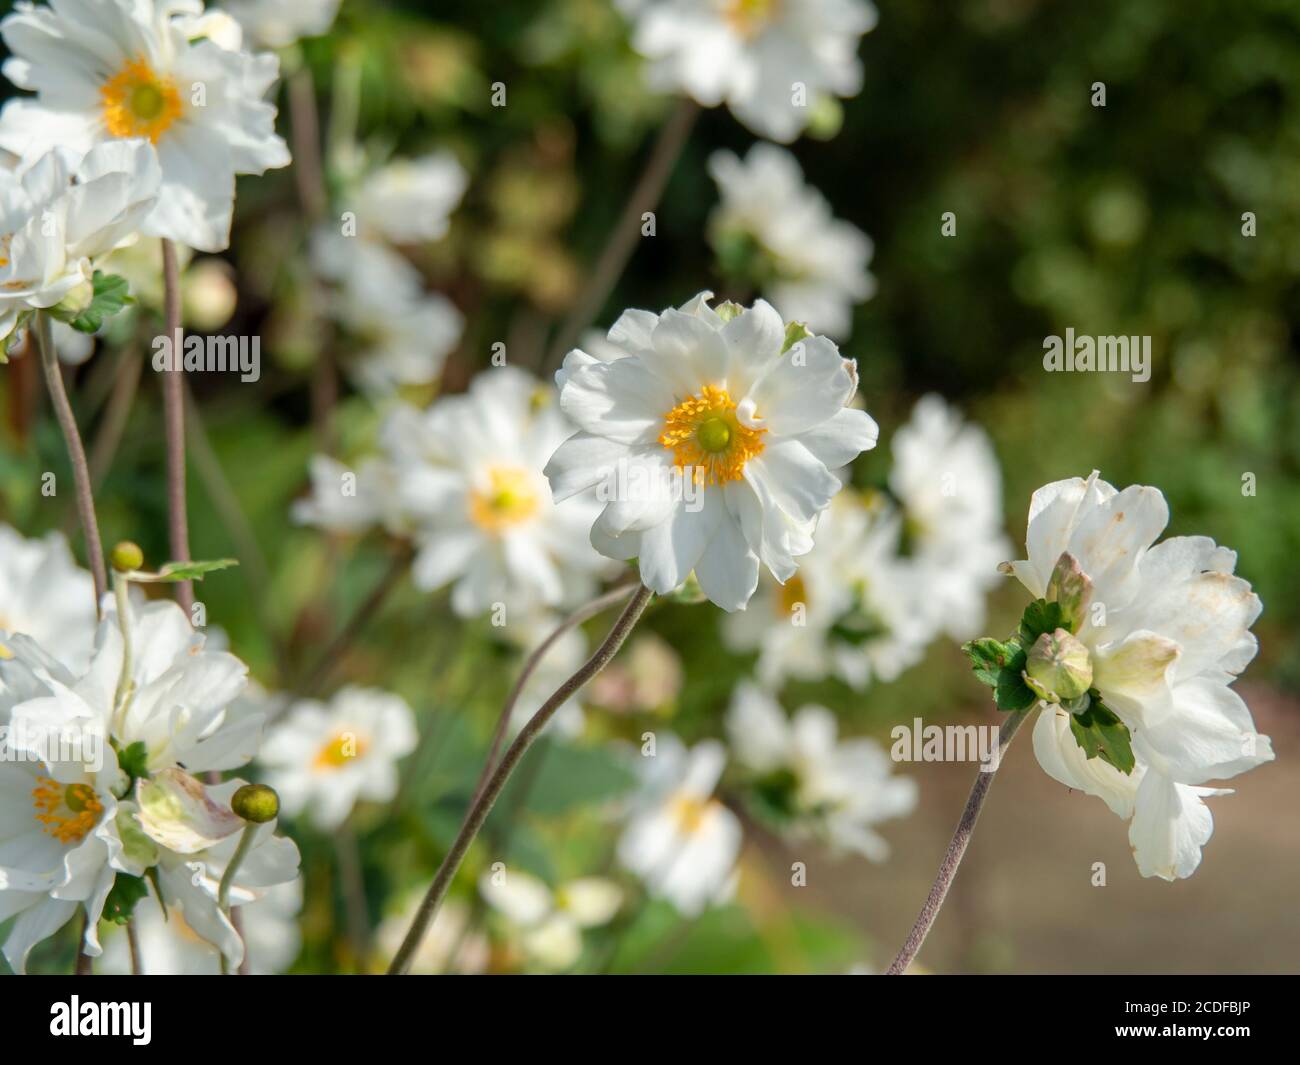 Pretty bright white anemone flowers blooming in a summer garden Stock Photo